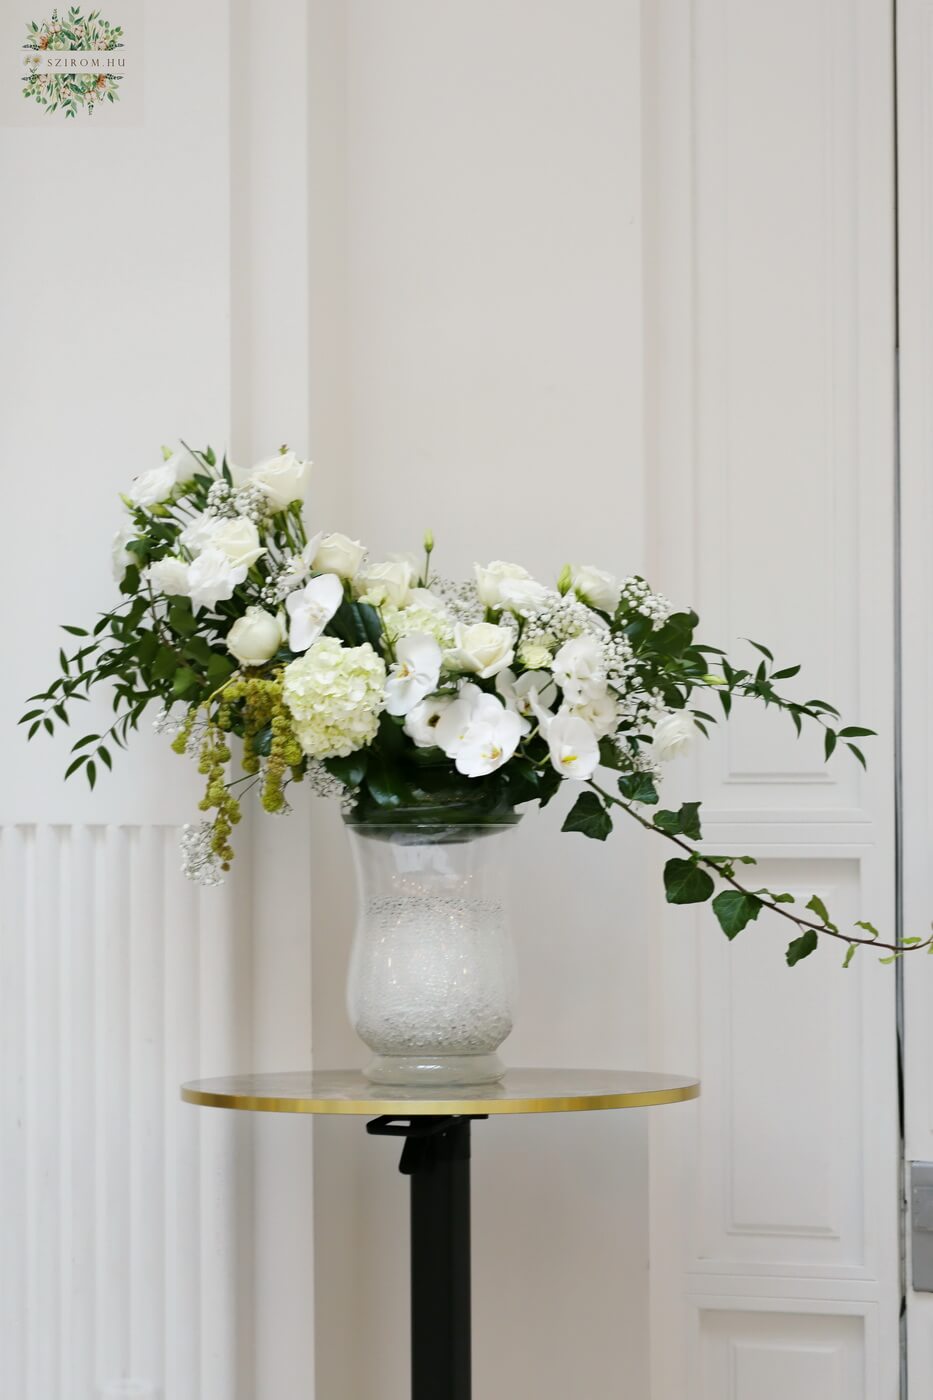 flower delivery Budapest - crescent moon shaped arrangement (white orchid, rose, lisianthus) wedding Gerbeaud